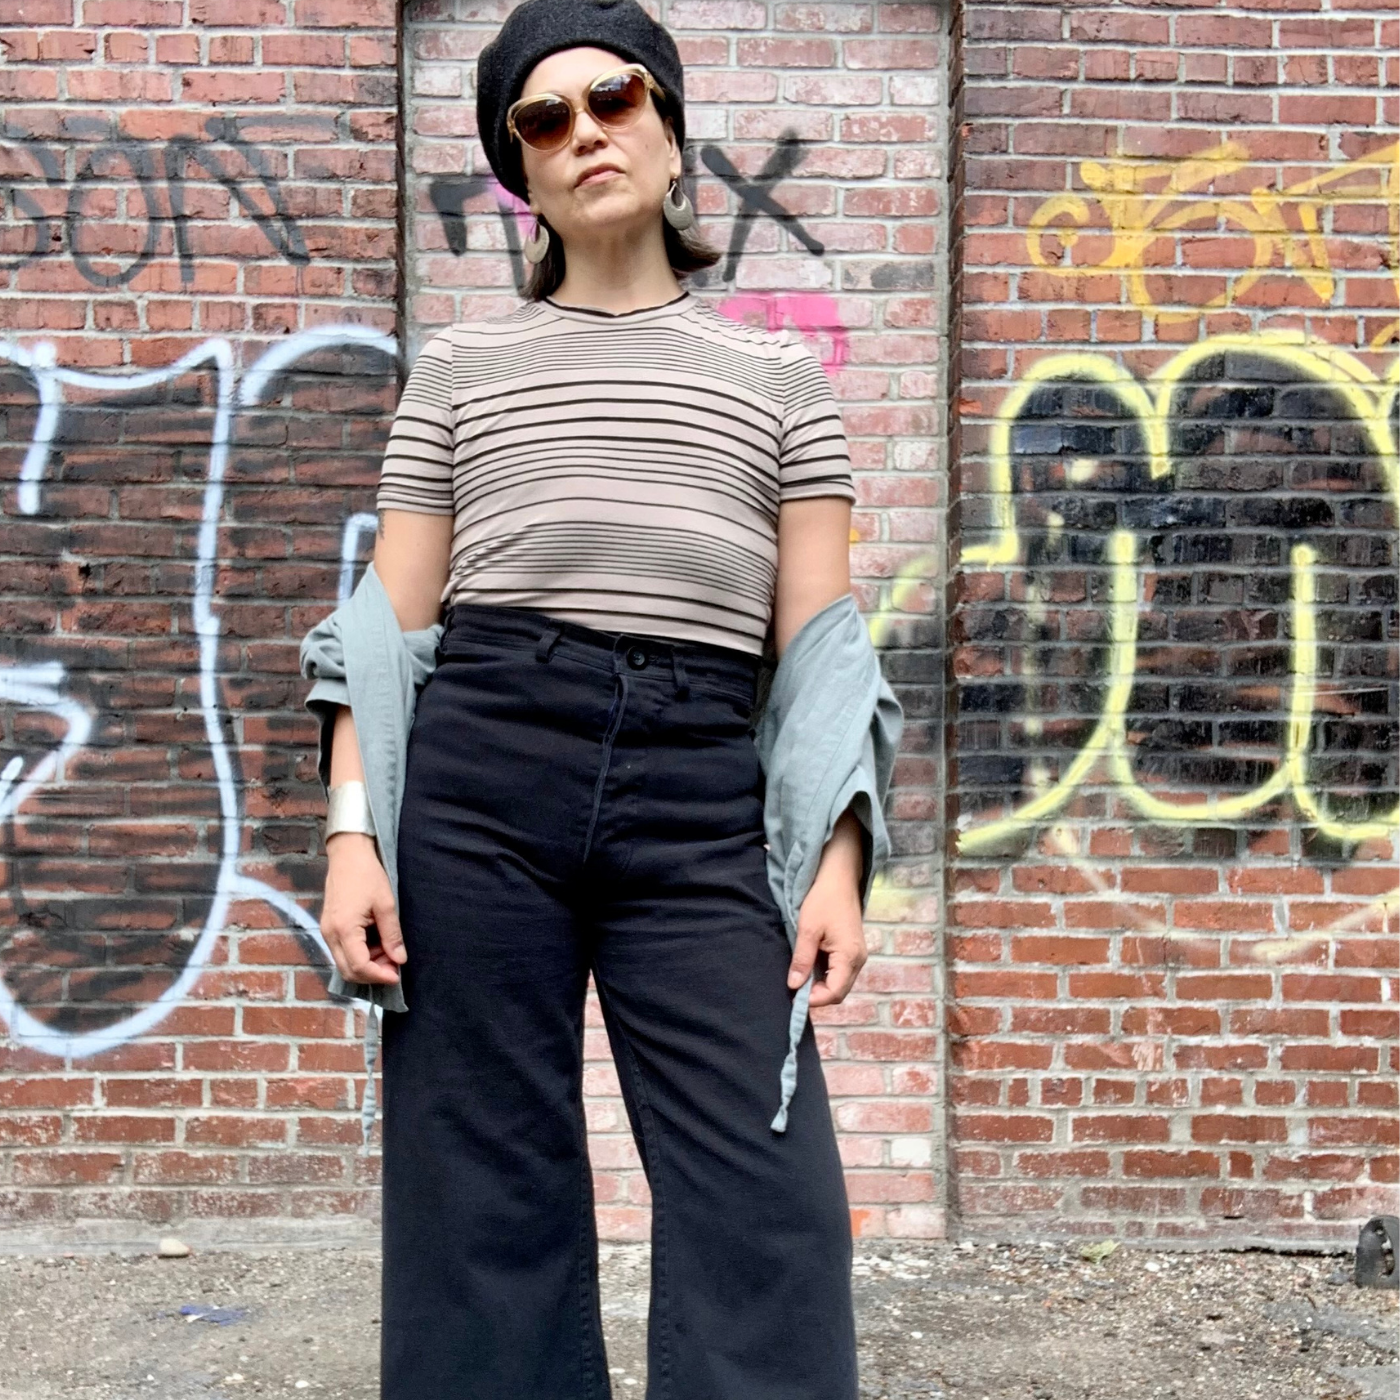 Denise Archer stands in front of a brick wall with graffiti wearing black trousers, a rose and black striped shirt, sunglasses and black hat